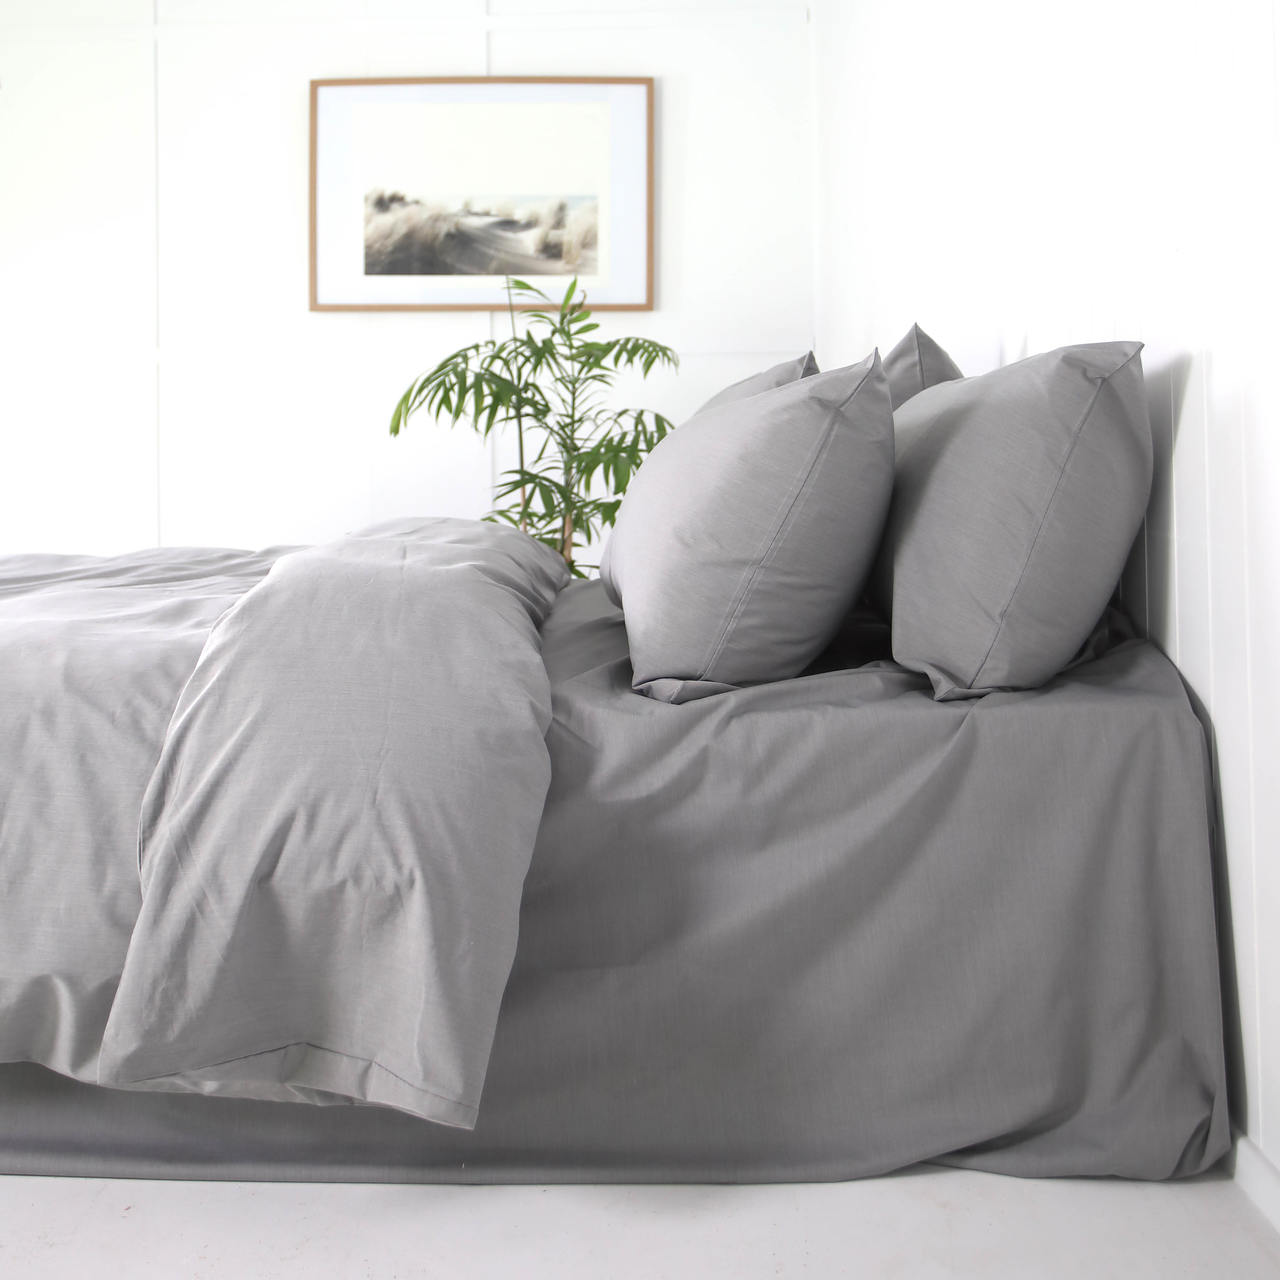 Bamboo Charcoal Quilt Cover Set GREY